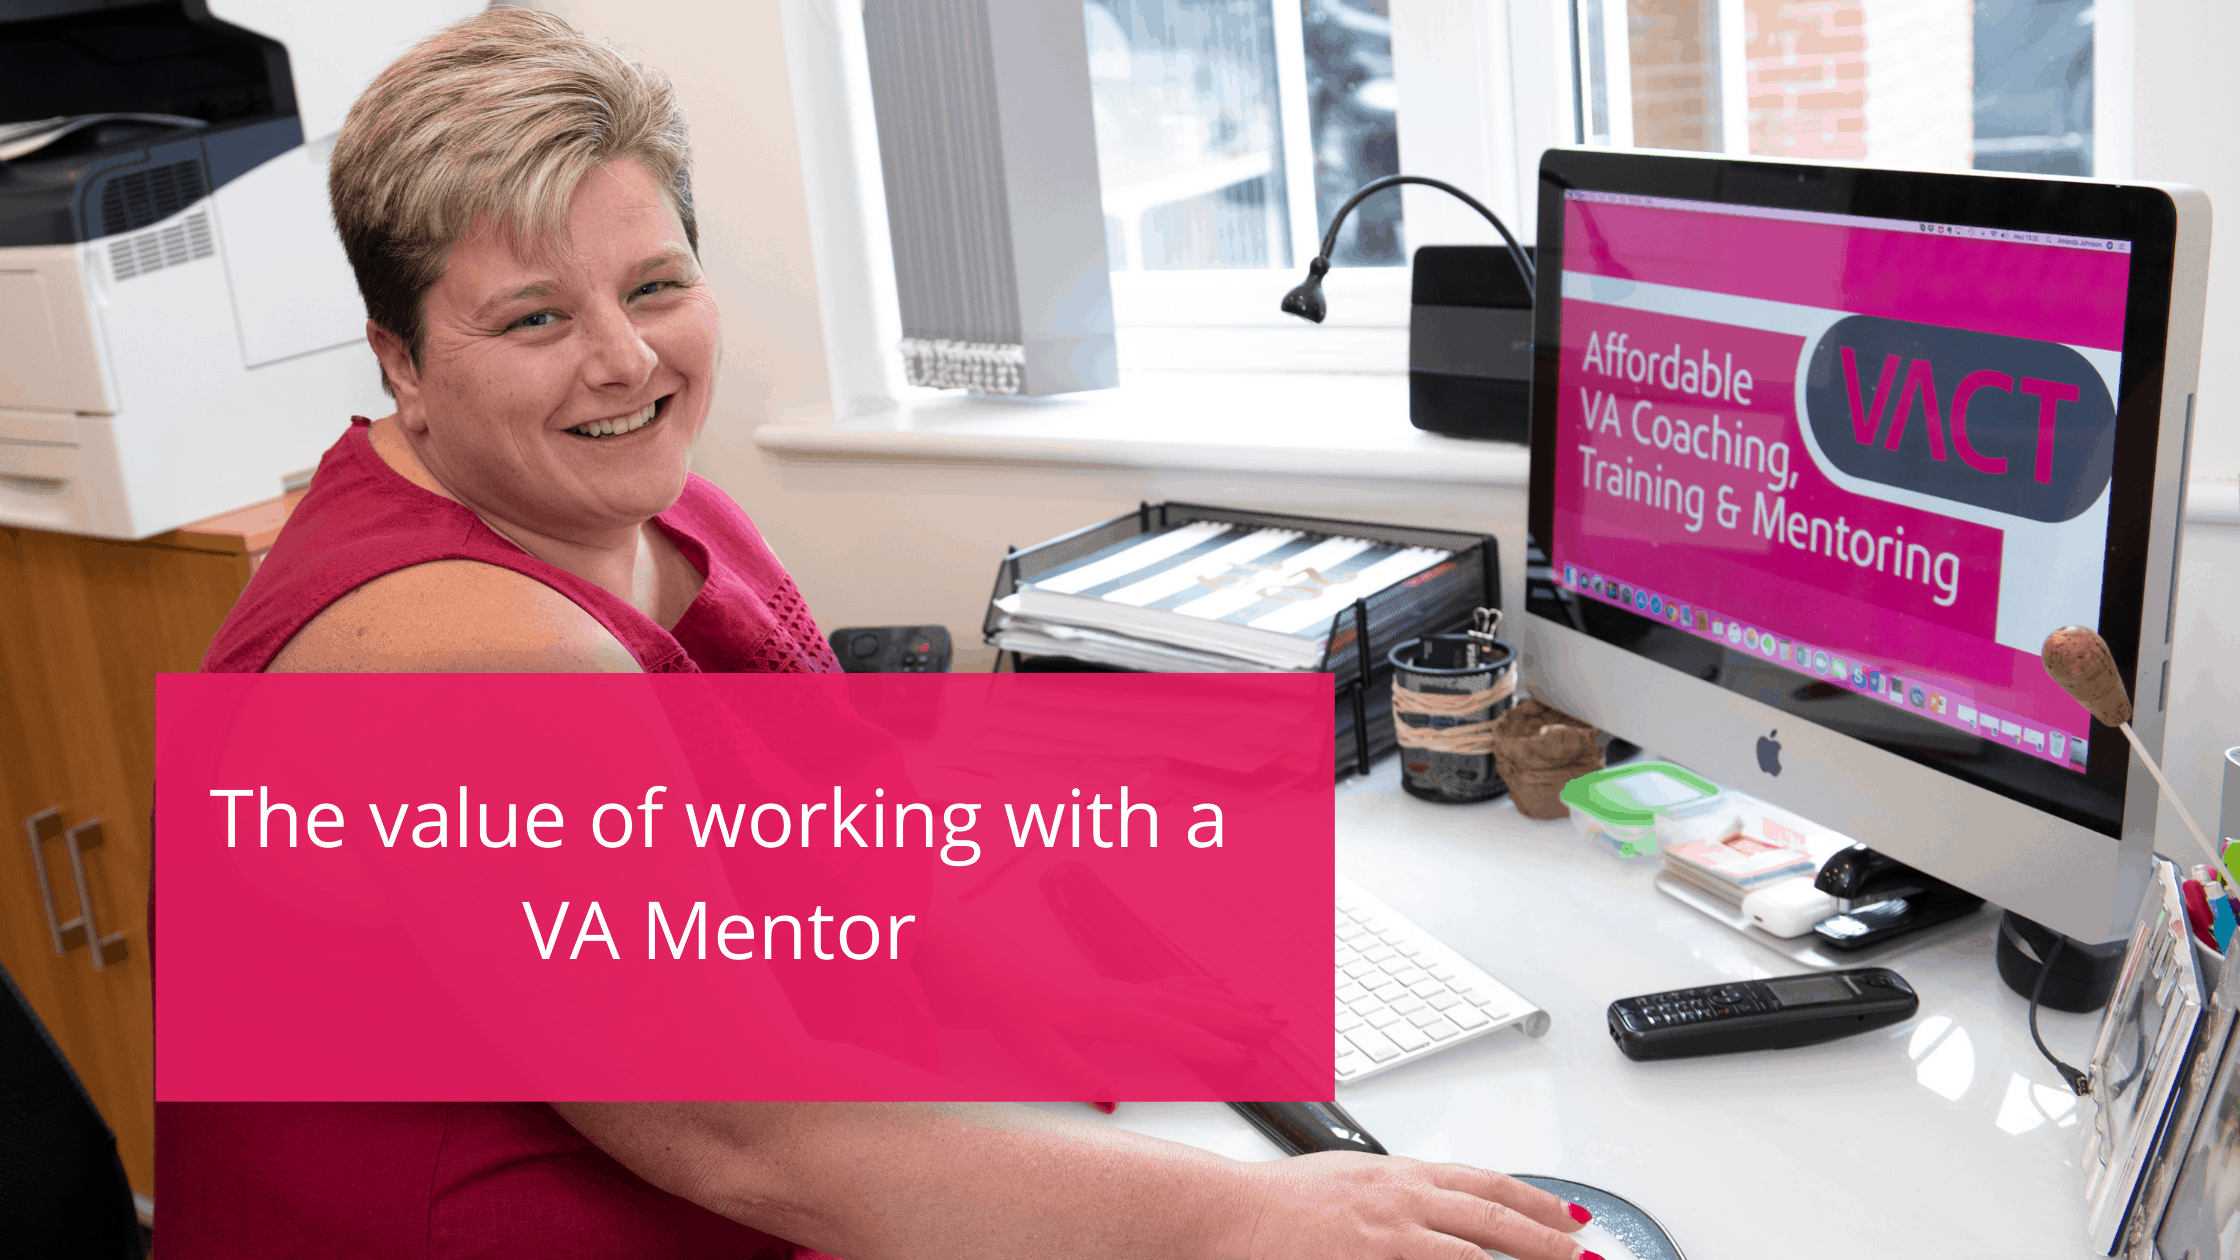 The value of working with a VA Mentor